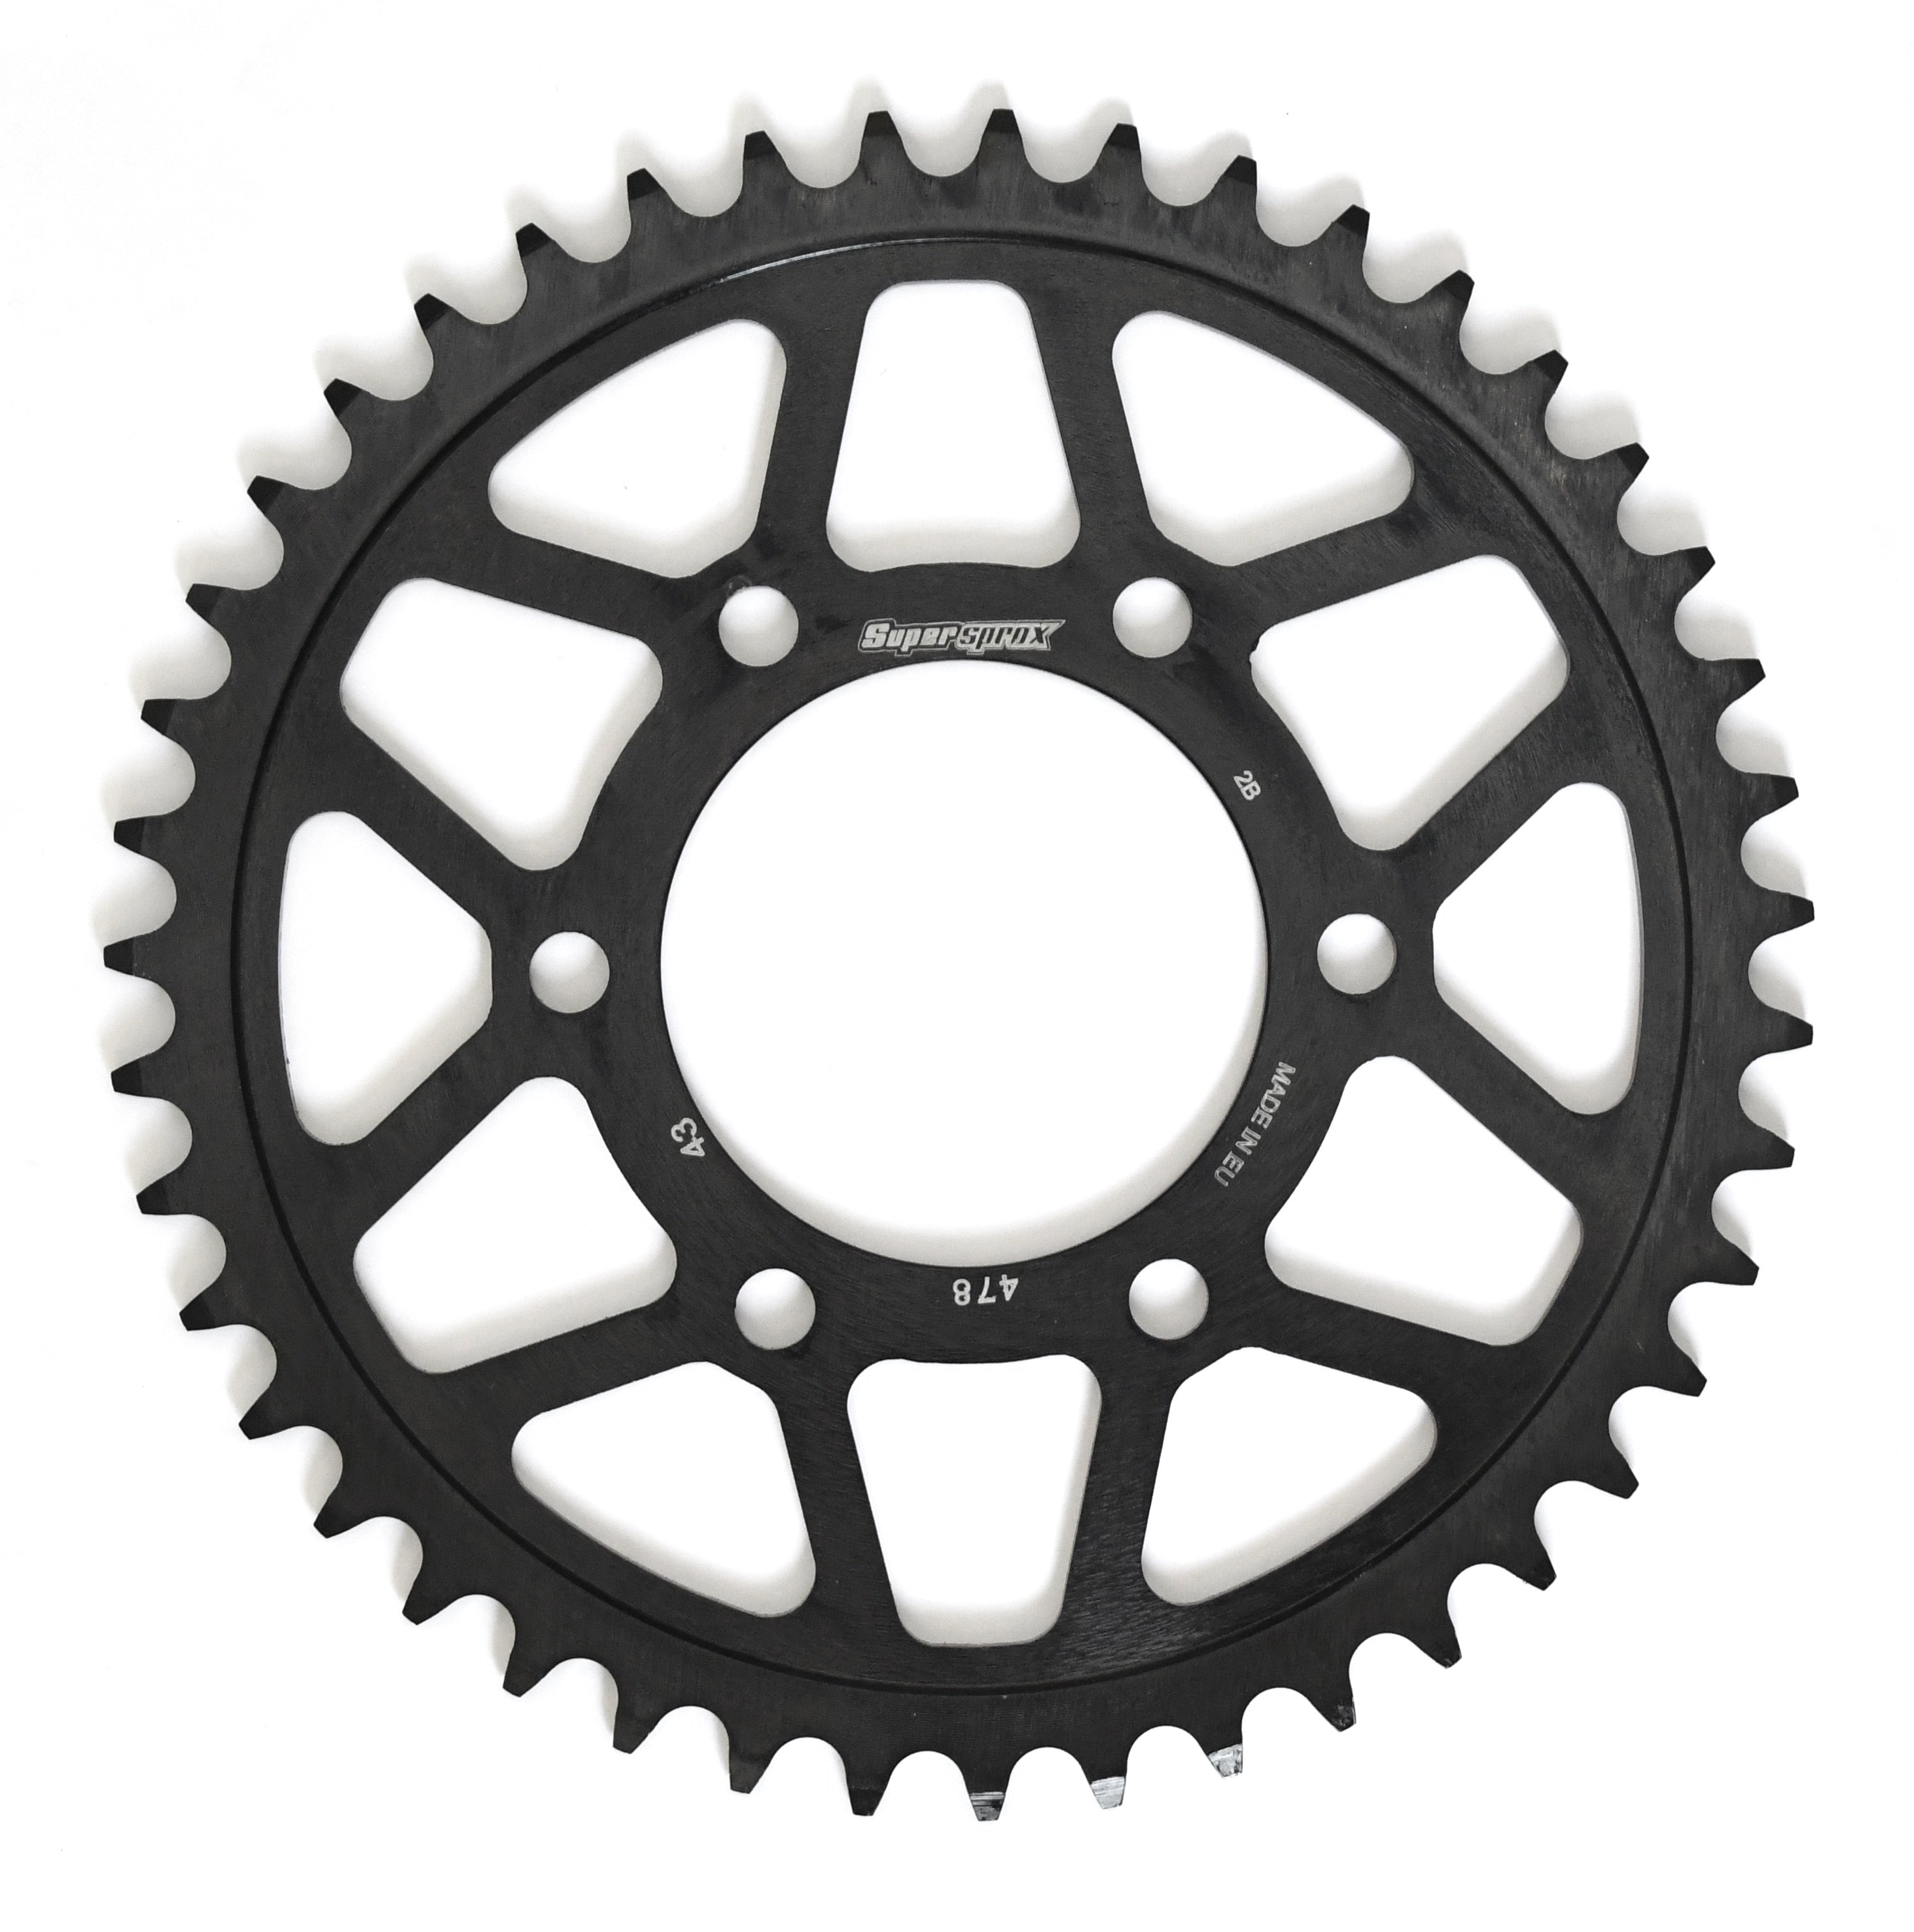 Supersprox Sprocket 478 - 520 Conversion - Choose Your Gearing